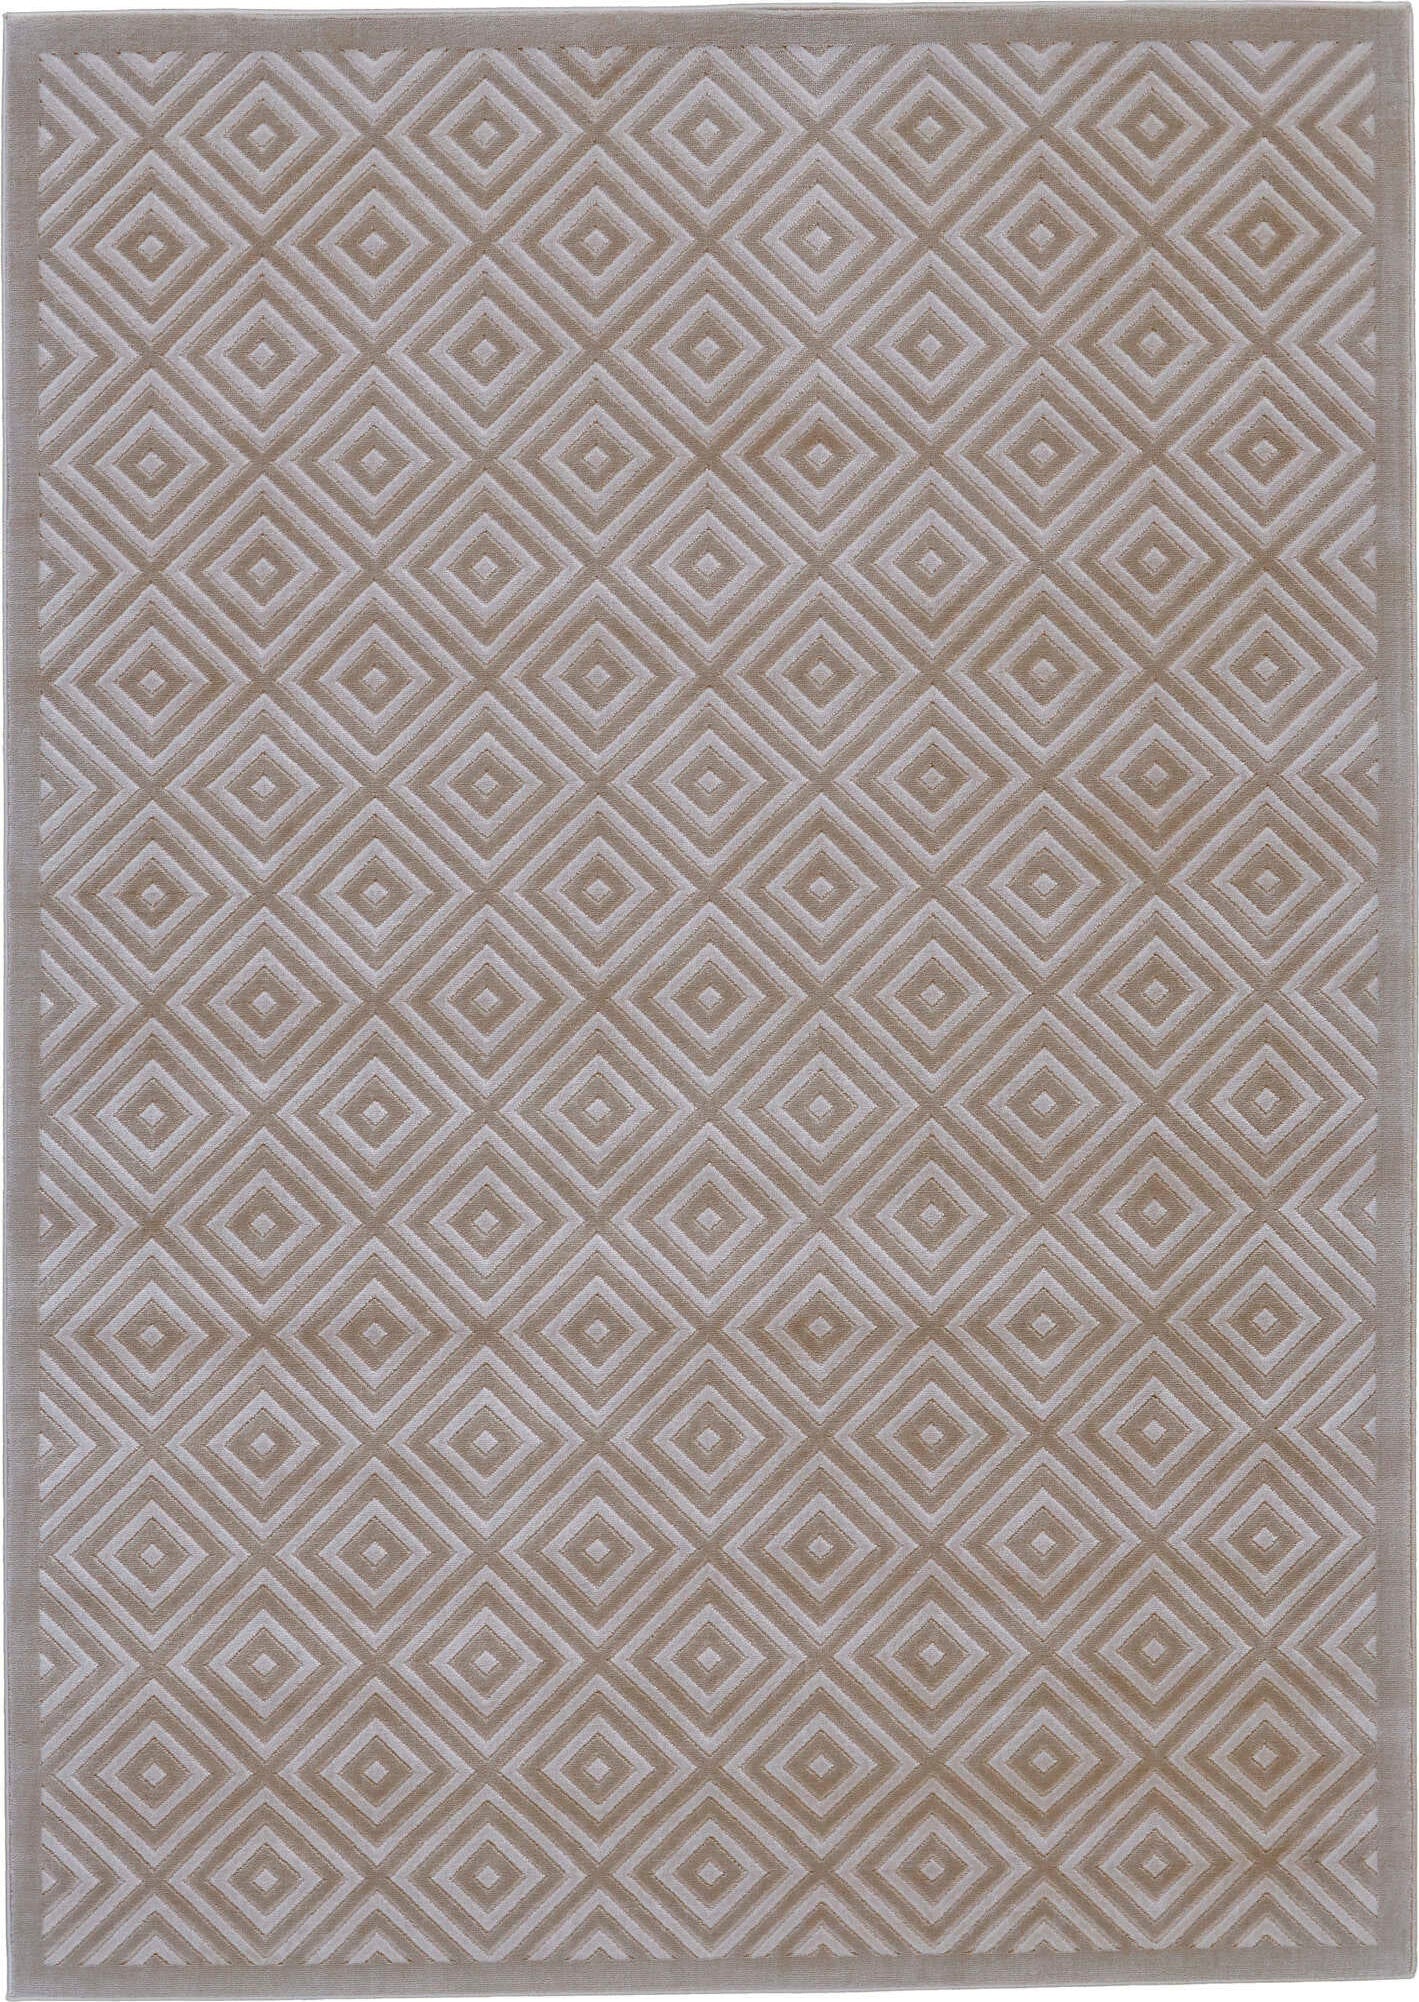 Feizy Melina 3399F Birch/Taupe Area Rug